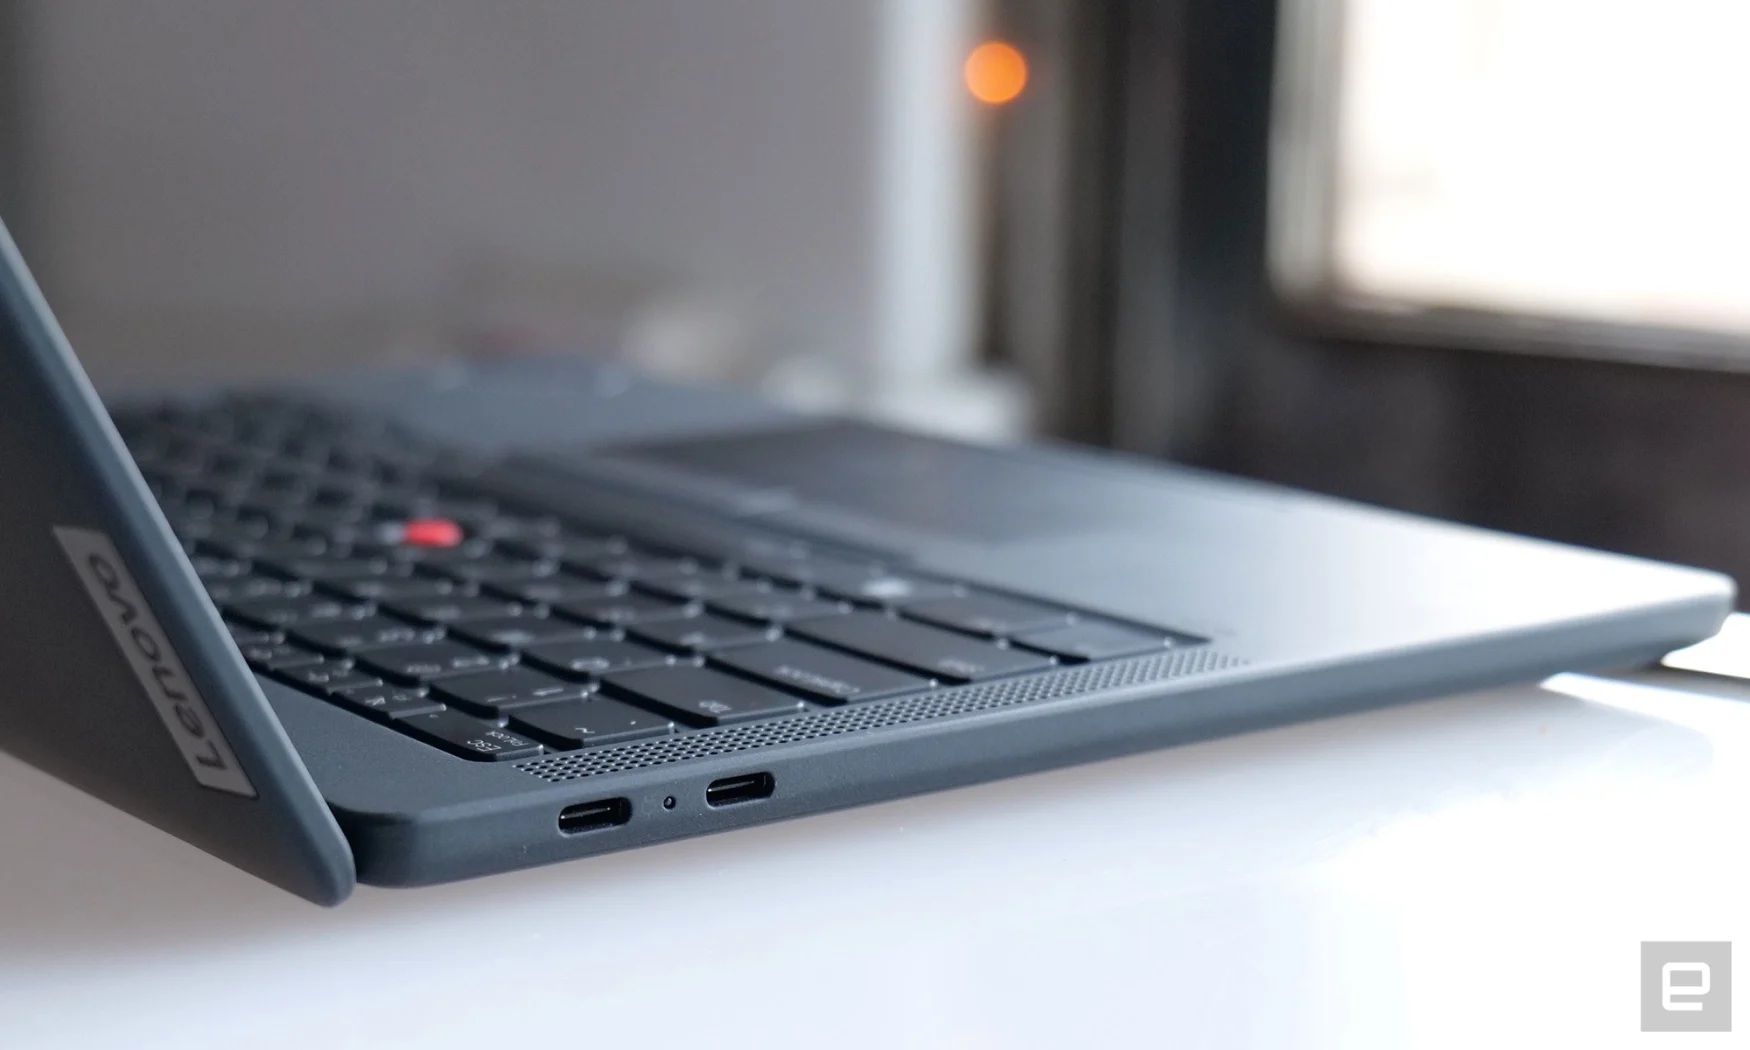 While it doesn't have a ton of ports, the ThinkPad X13s does include two USB-C ports and a headphone jack. 